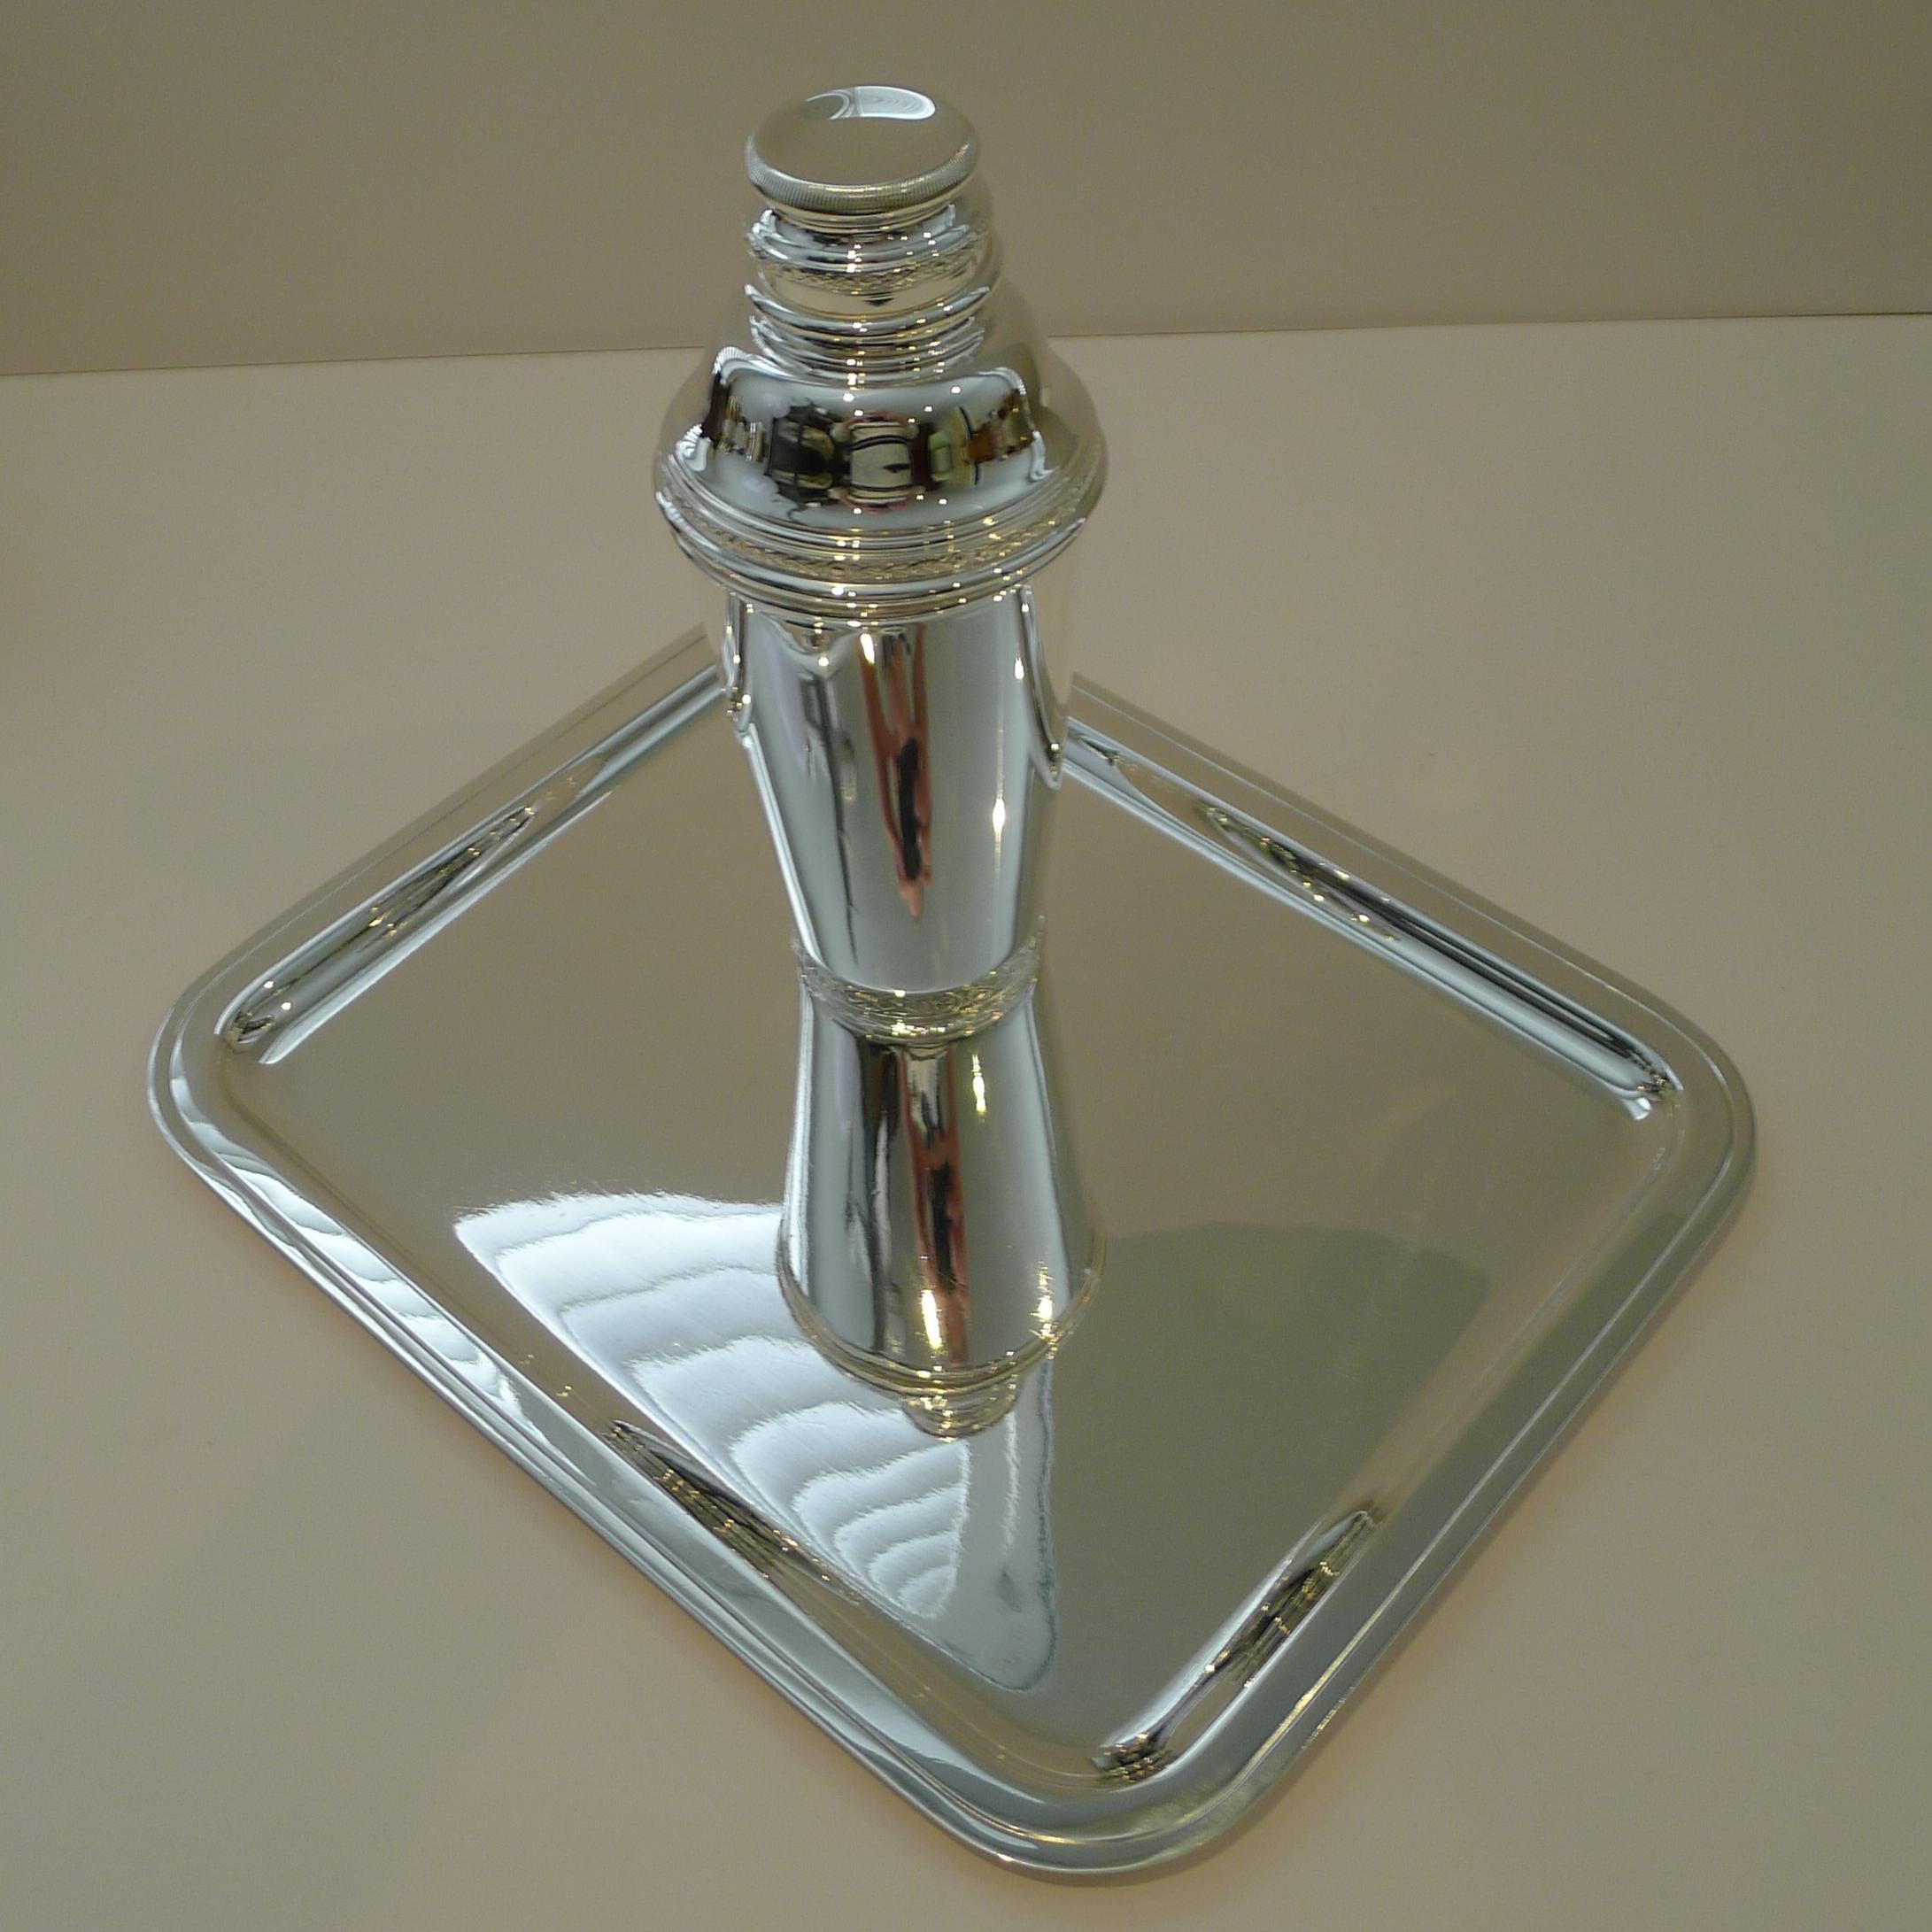 Art Deco Cocktail Tray by Ravinet d'Enfert, Paris c.1940 In Good Condition For Sale In Bath, GB